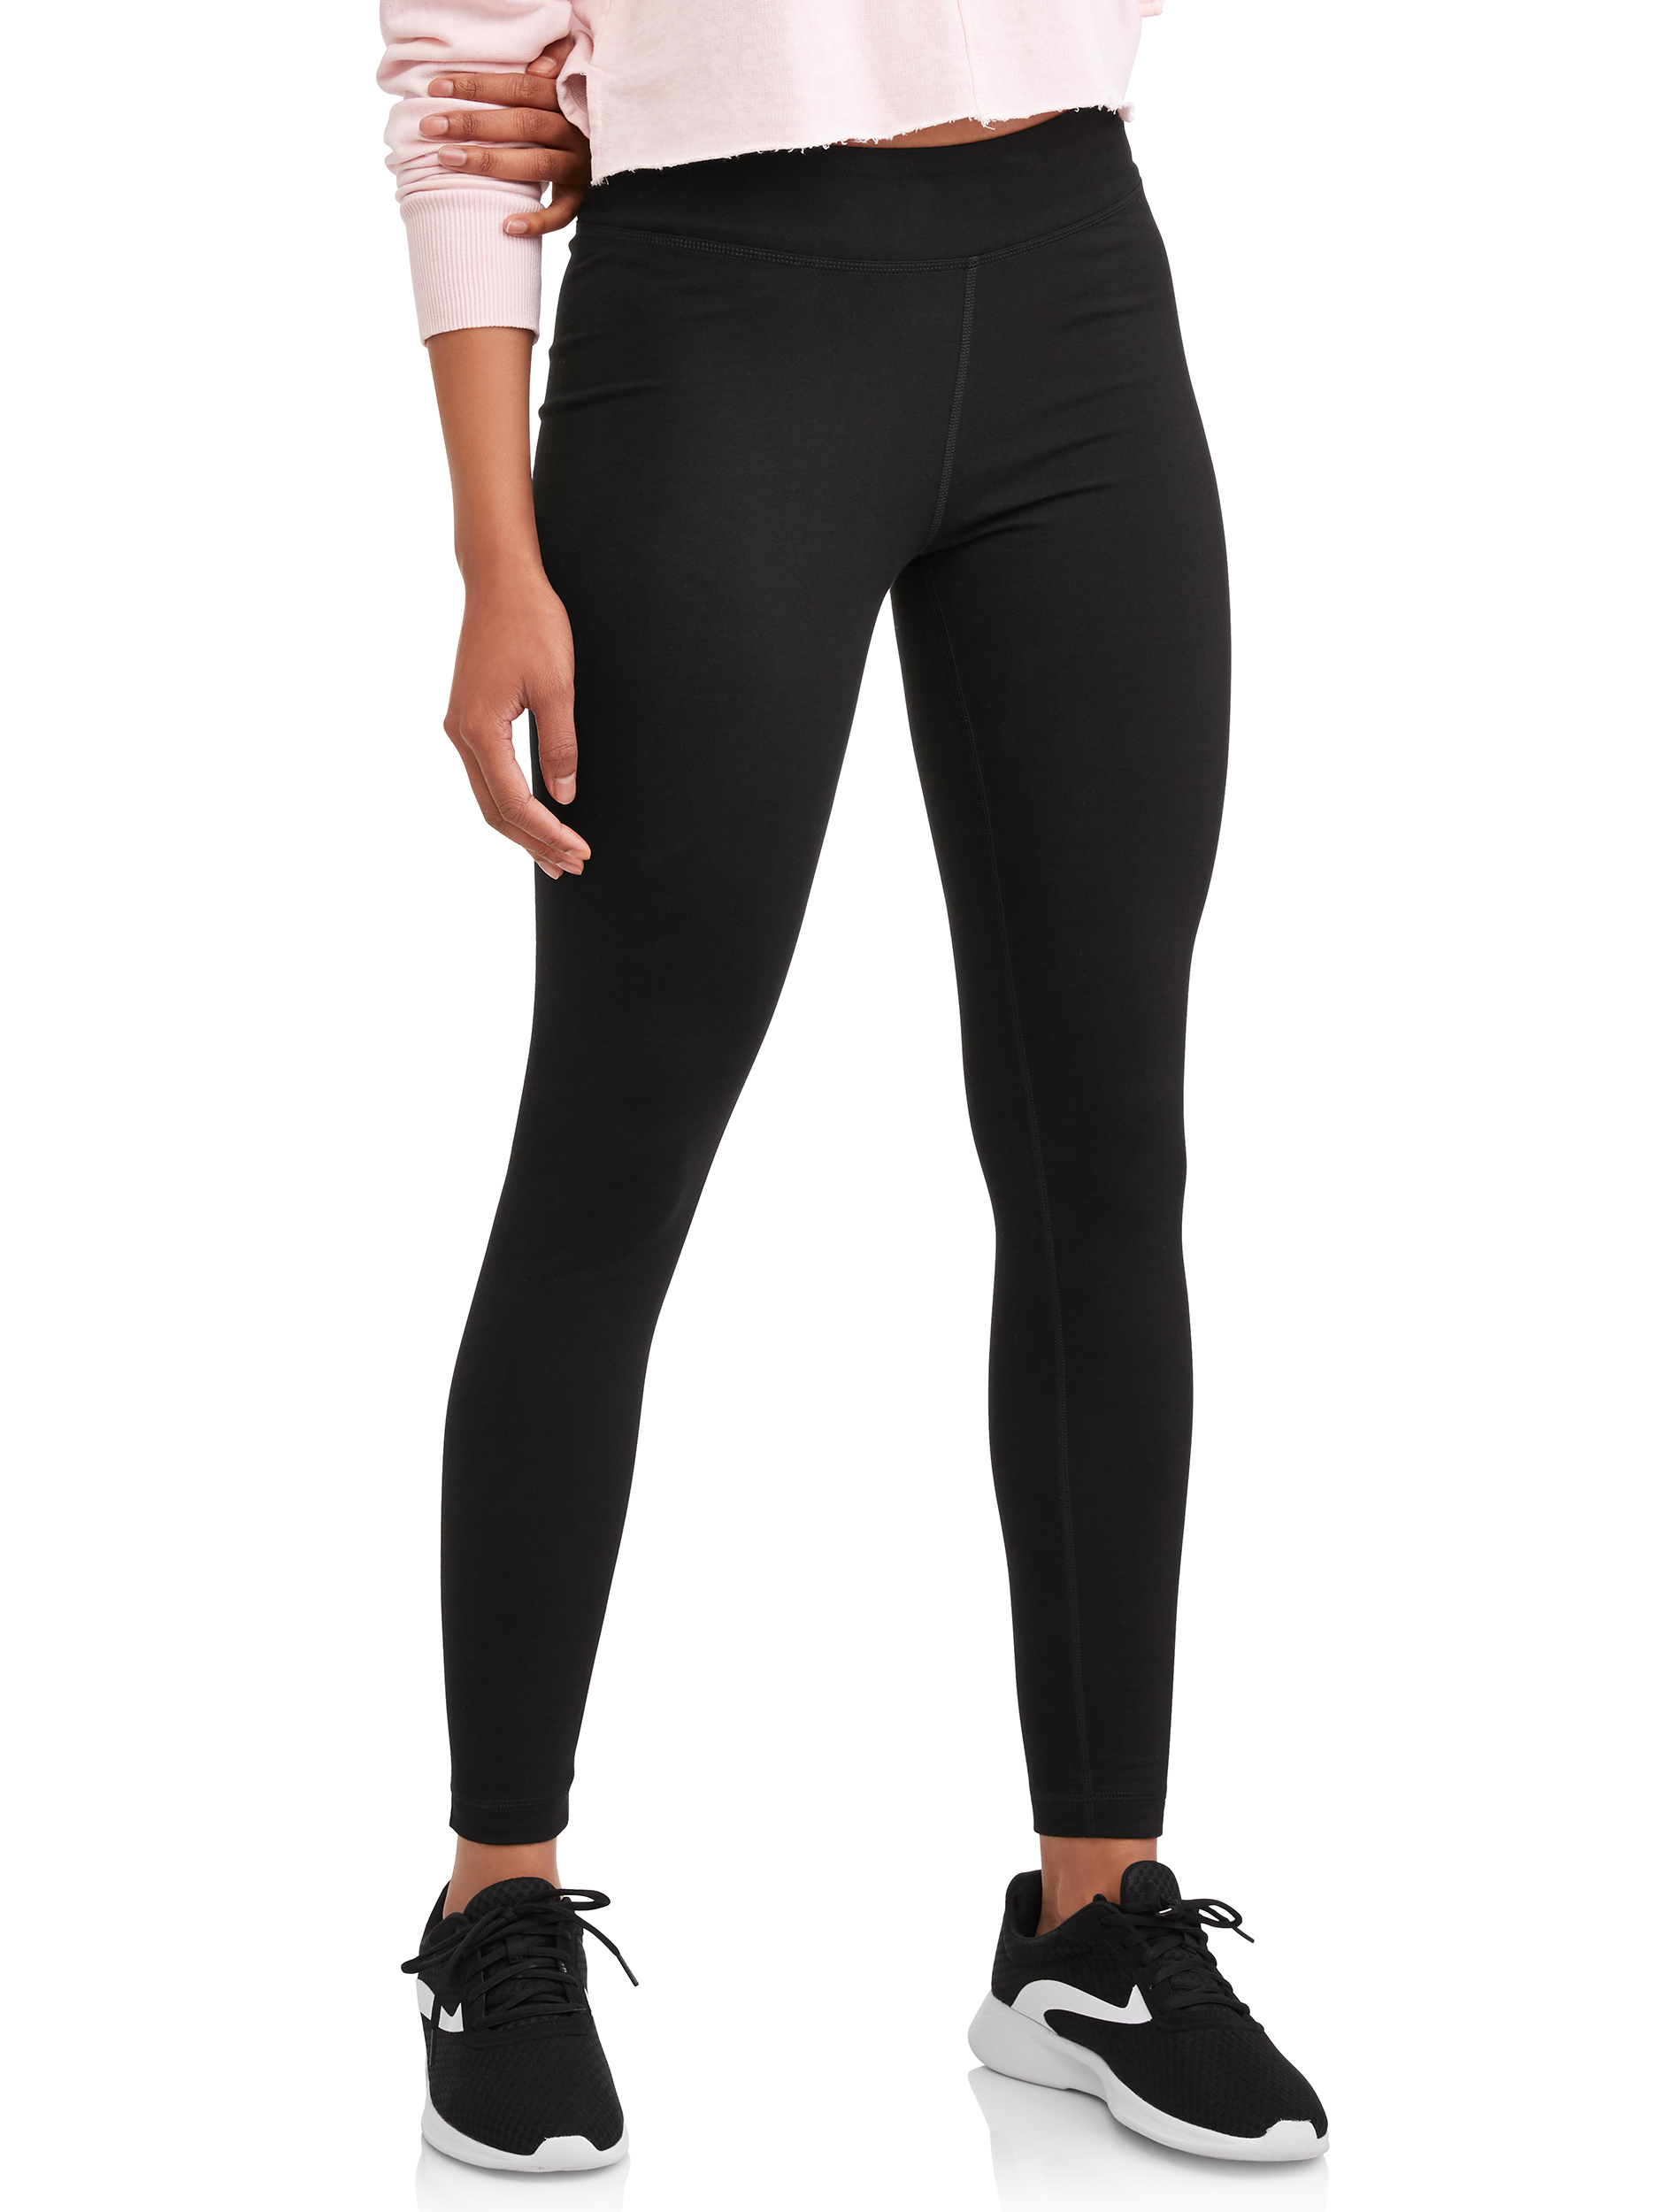 Athletic Works Women's Active Fit Mid Rise Leggings, Sizes S-XXL - image 1 of 4